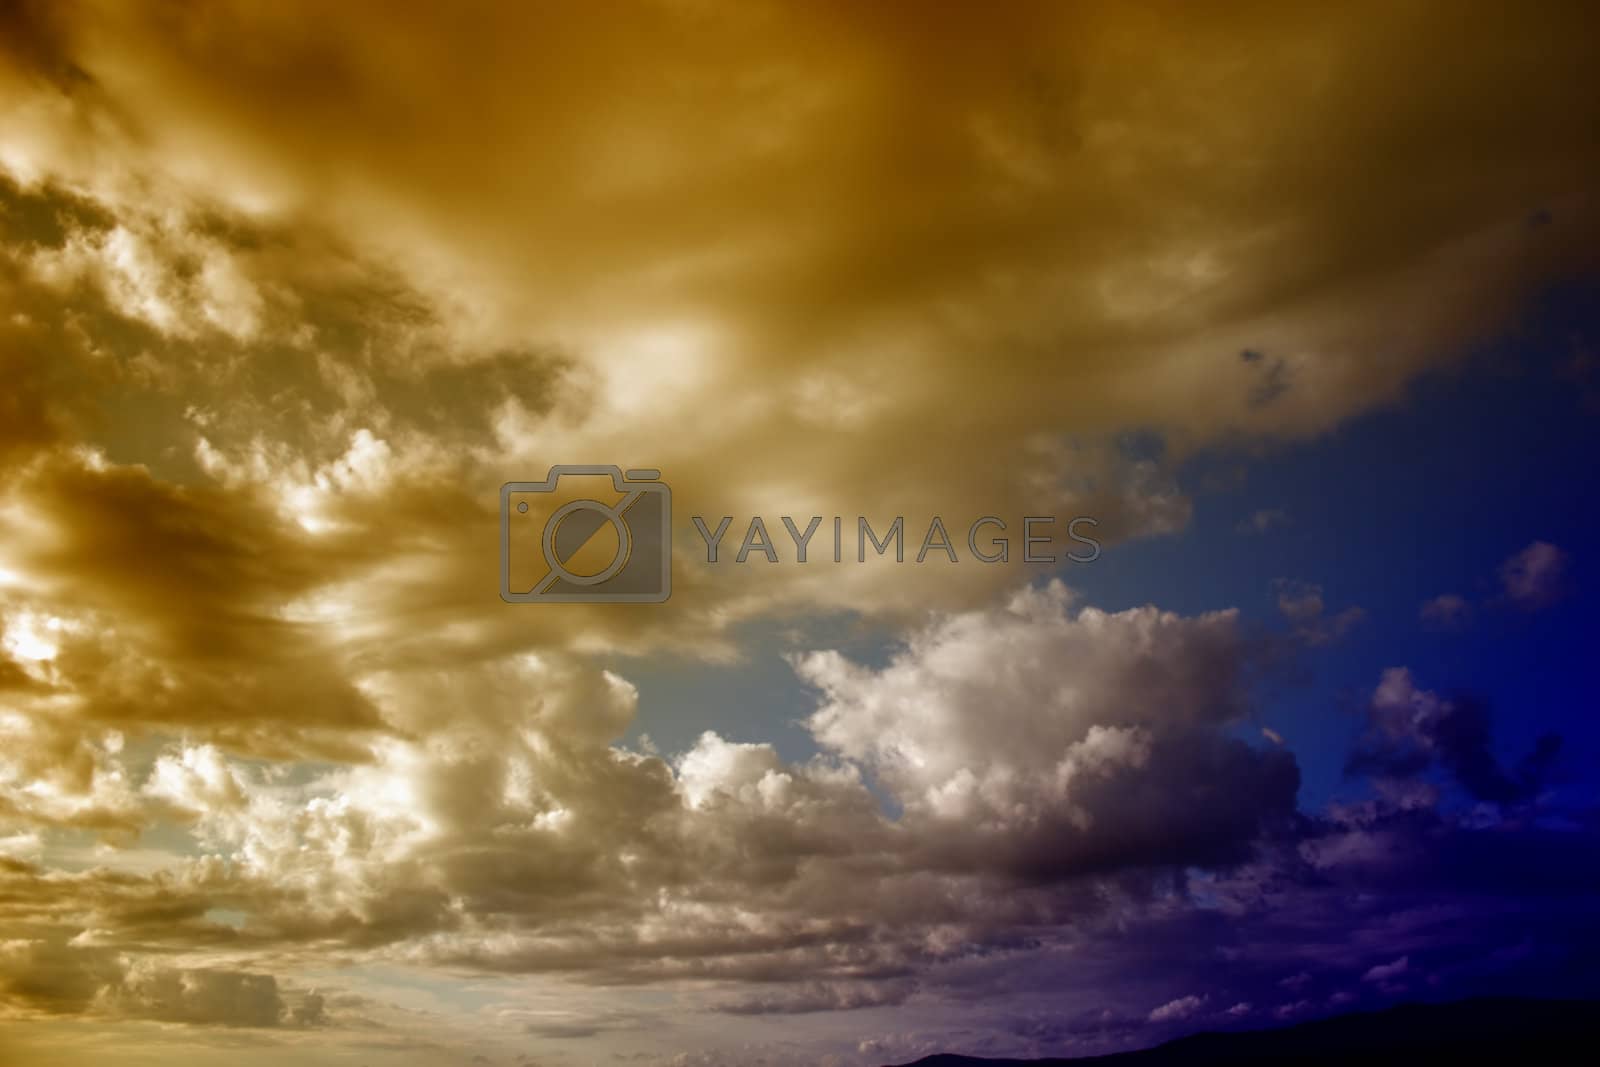 Royalty free image of CLOUDS by charlieisland